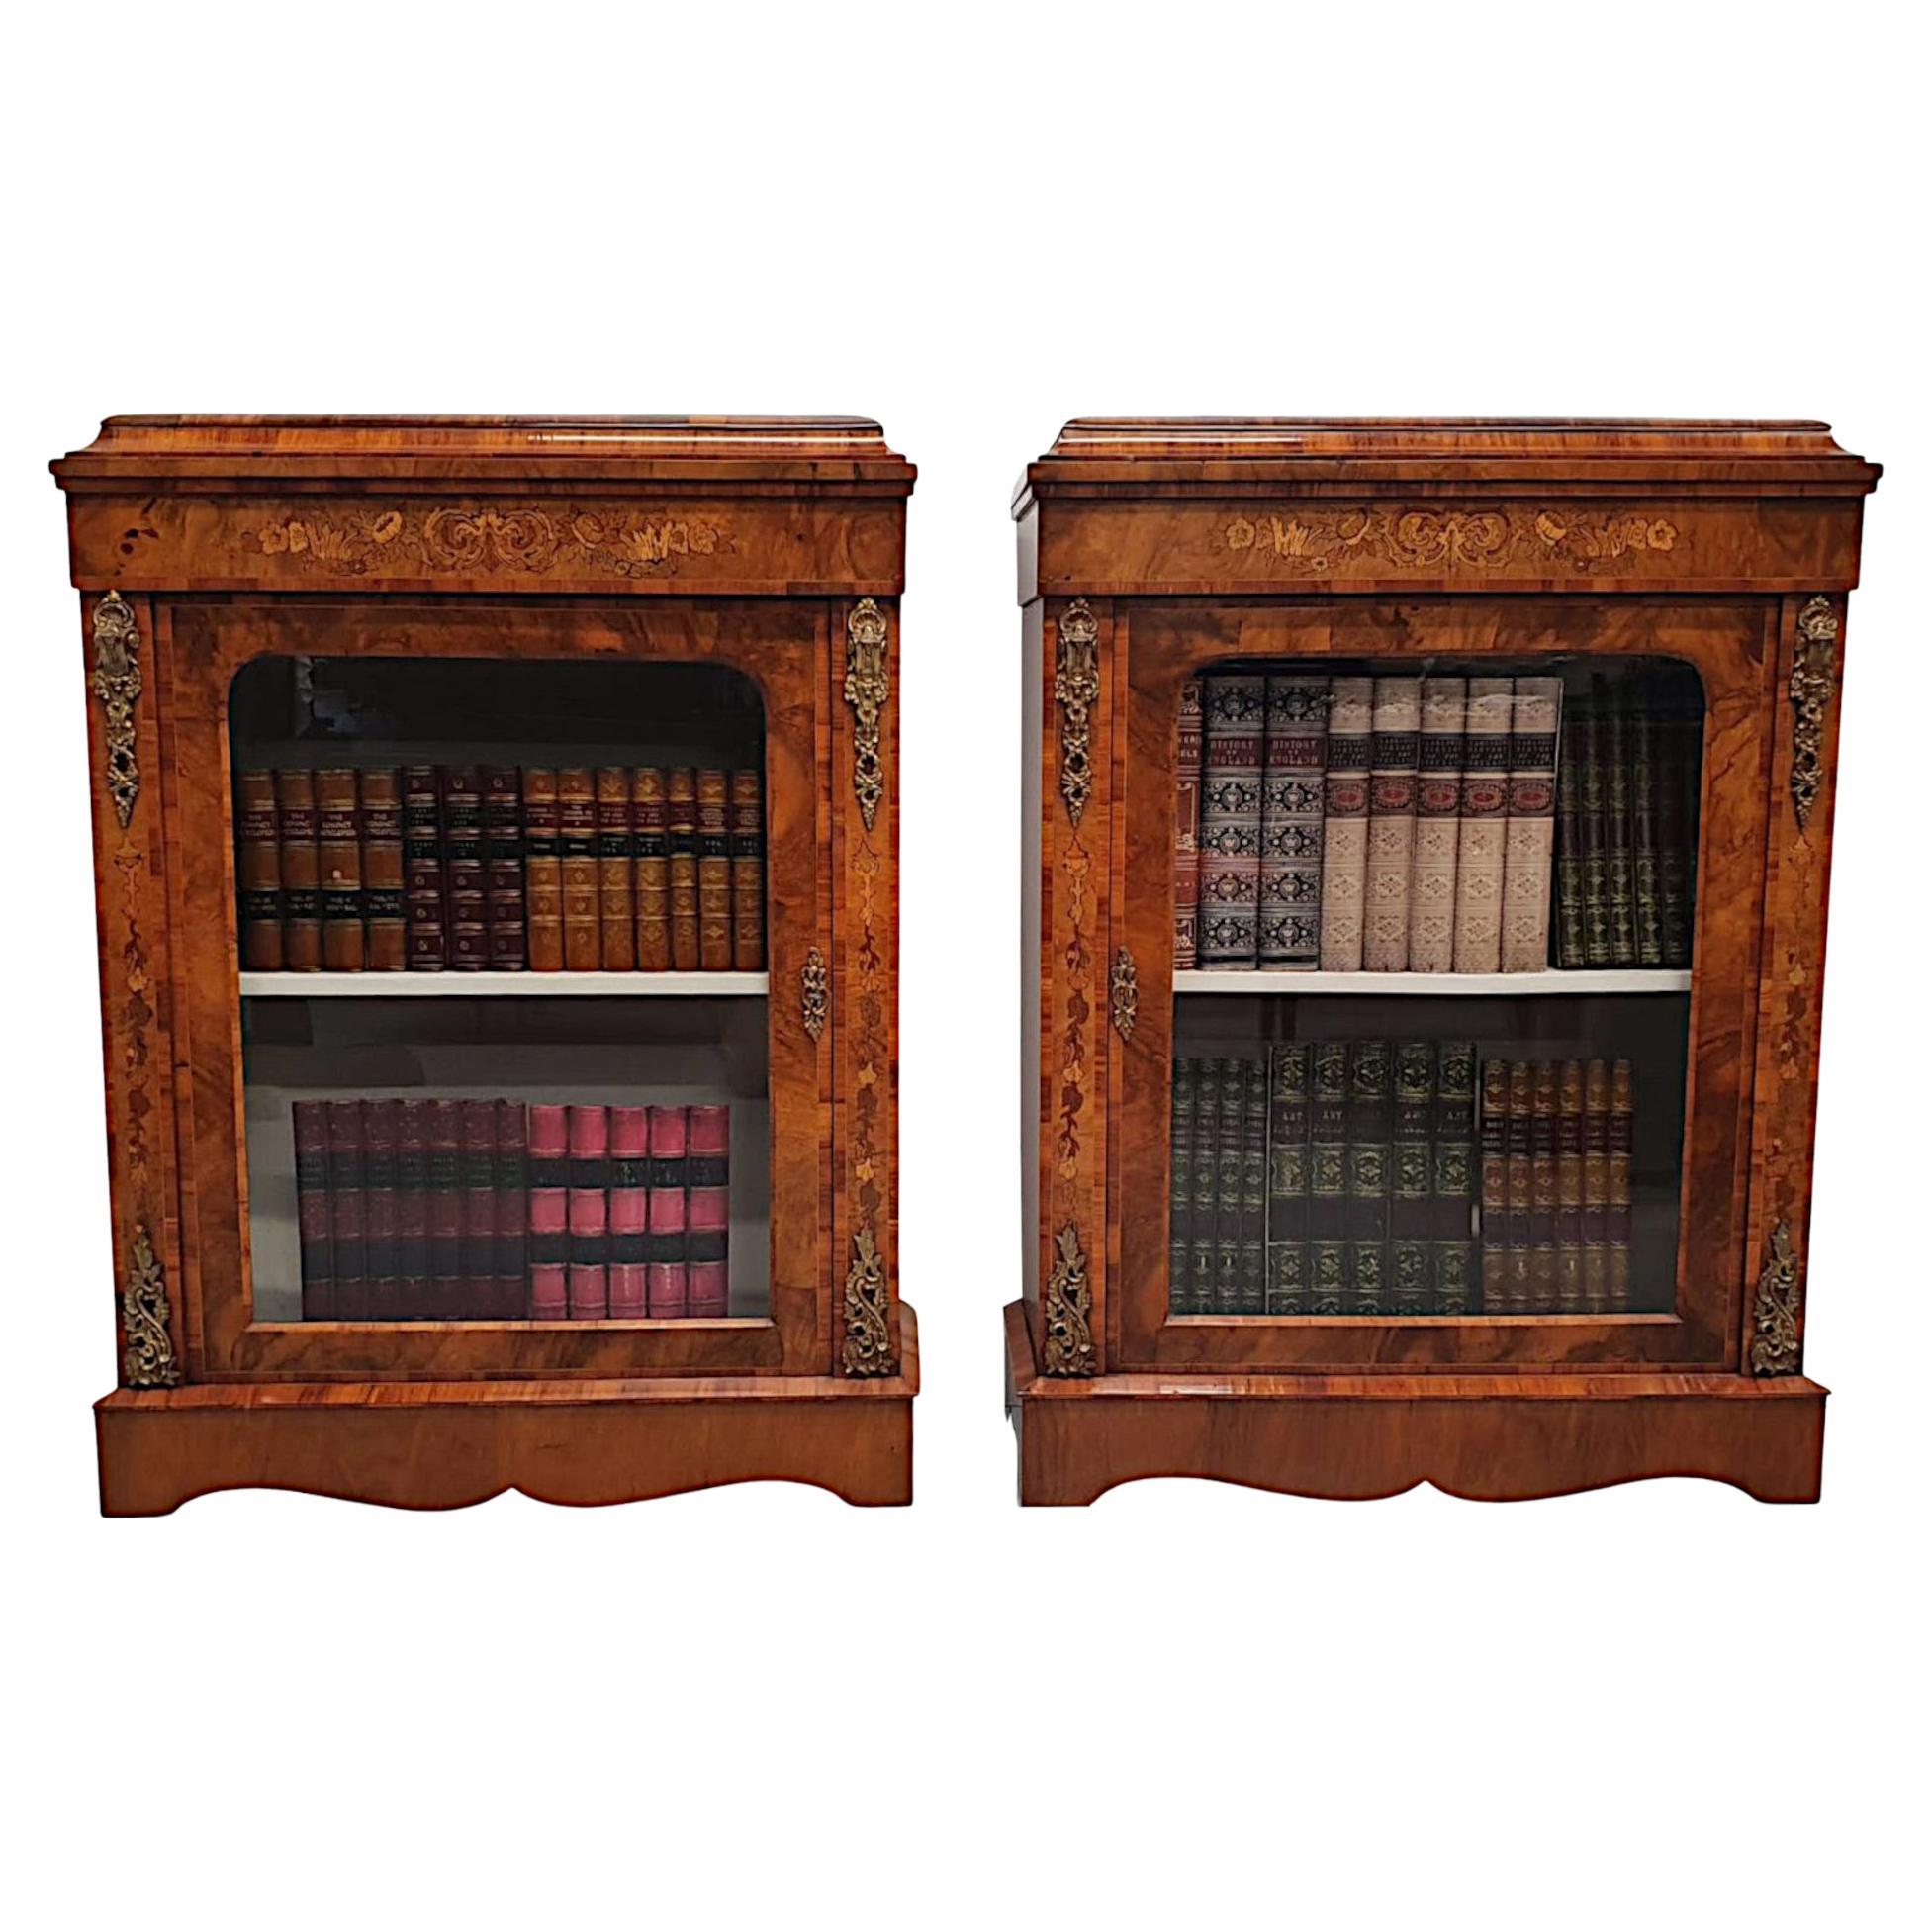 Exceptional Pair of Rare 19th Century Pier Cabinets or Bookcases